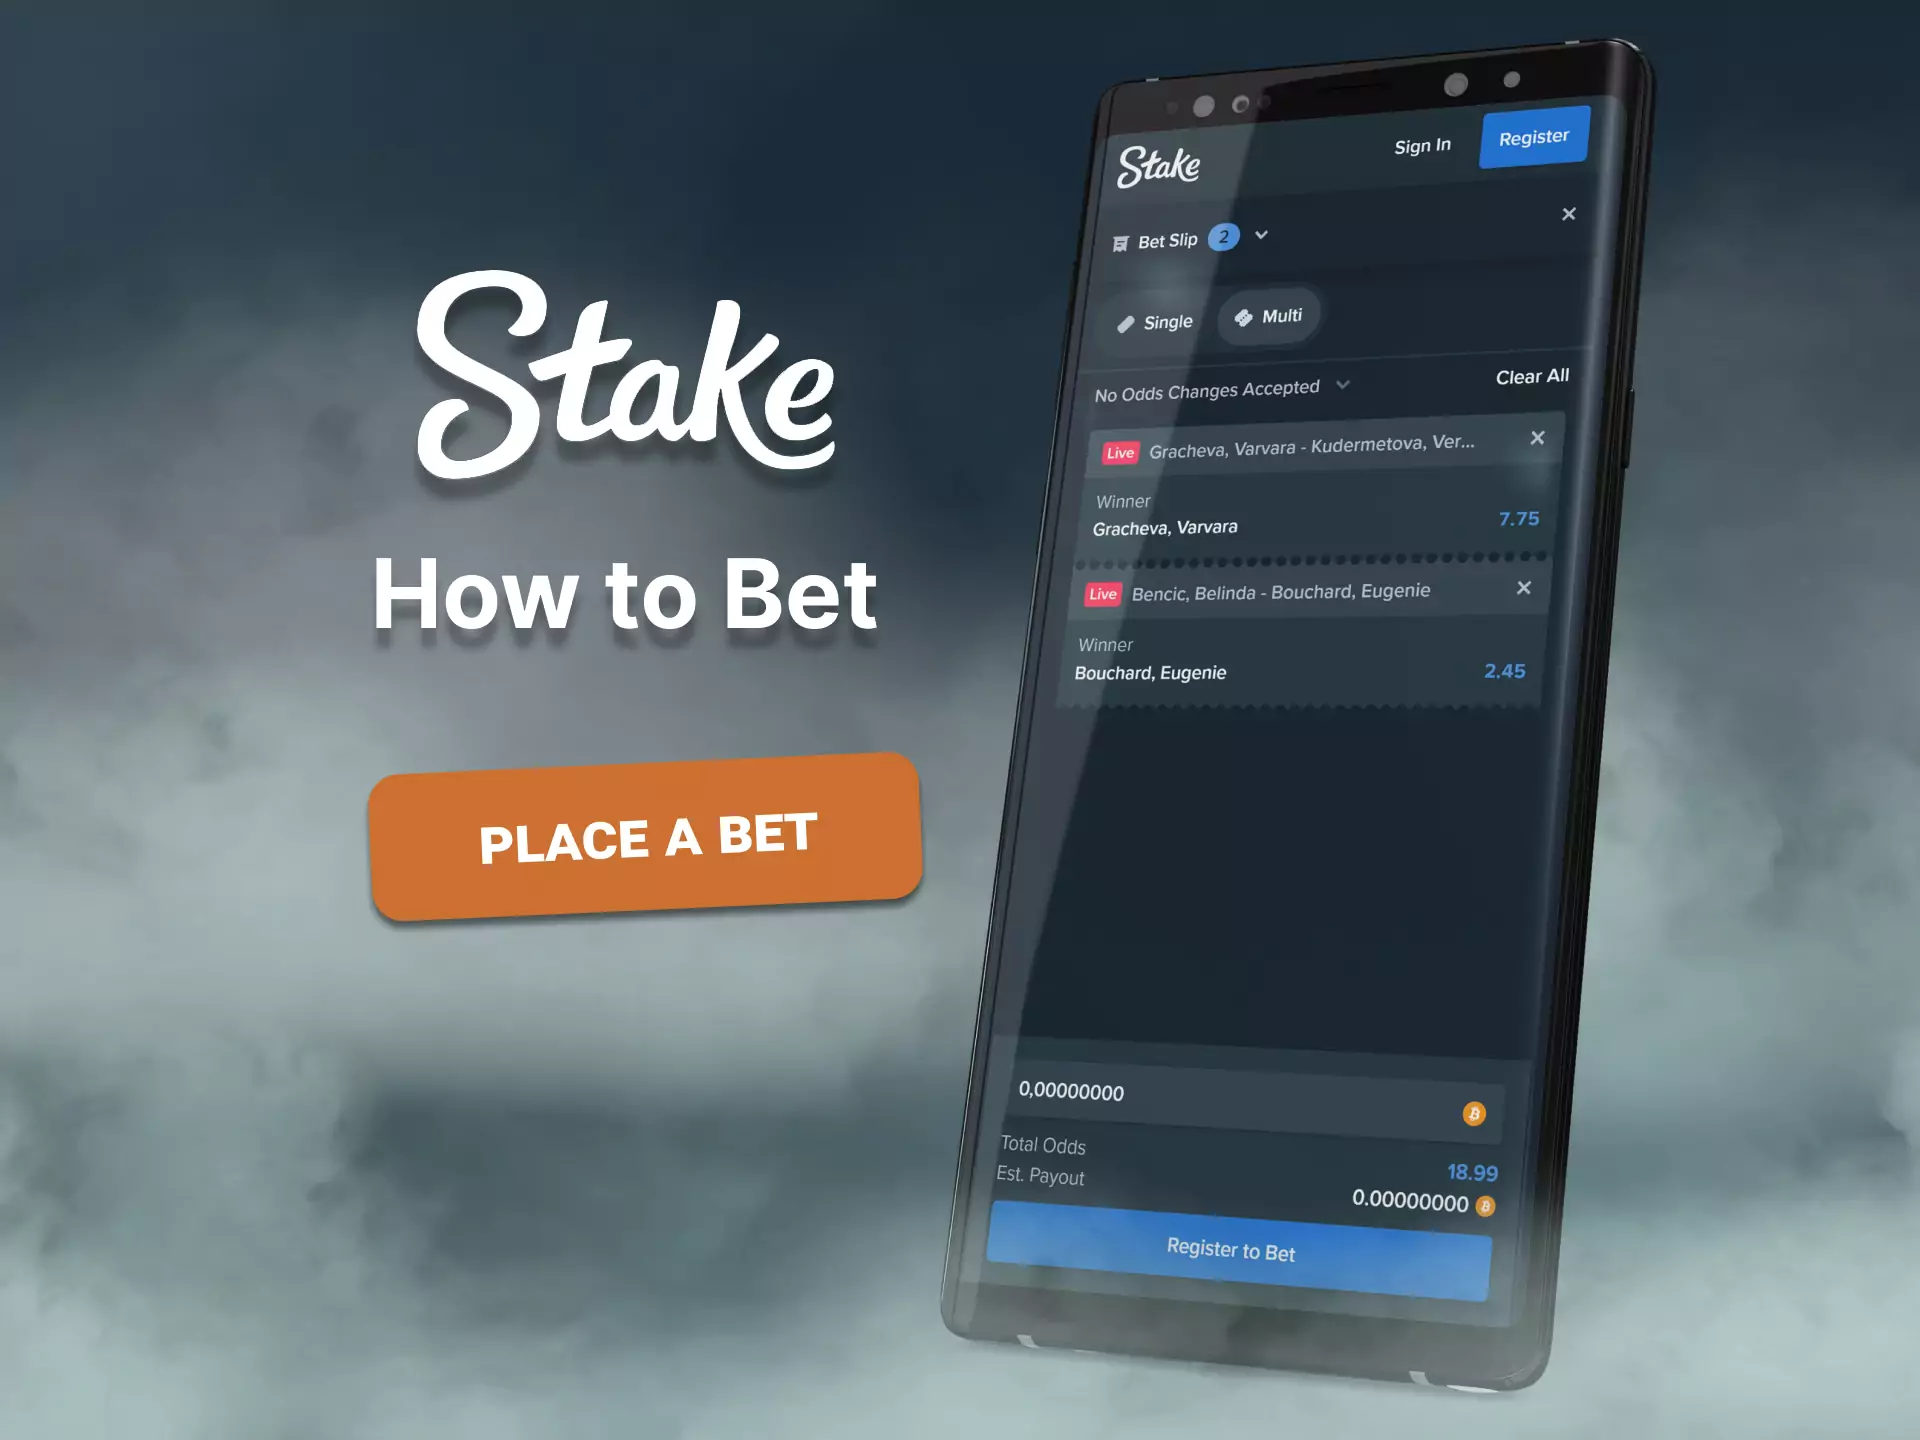 Use this instruction to place your first bet with Stake.com.